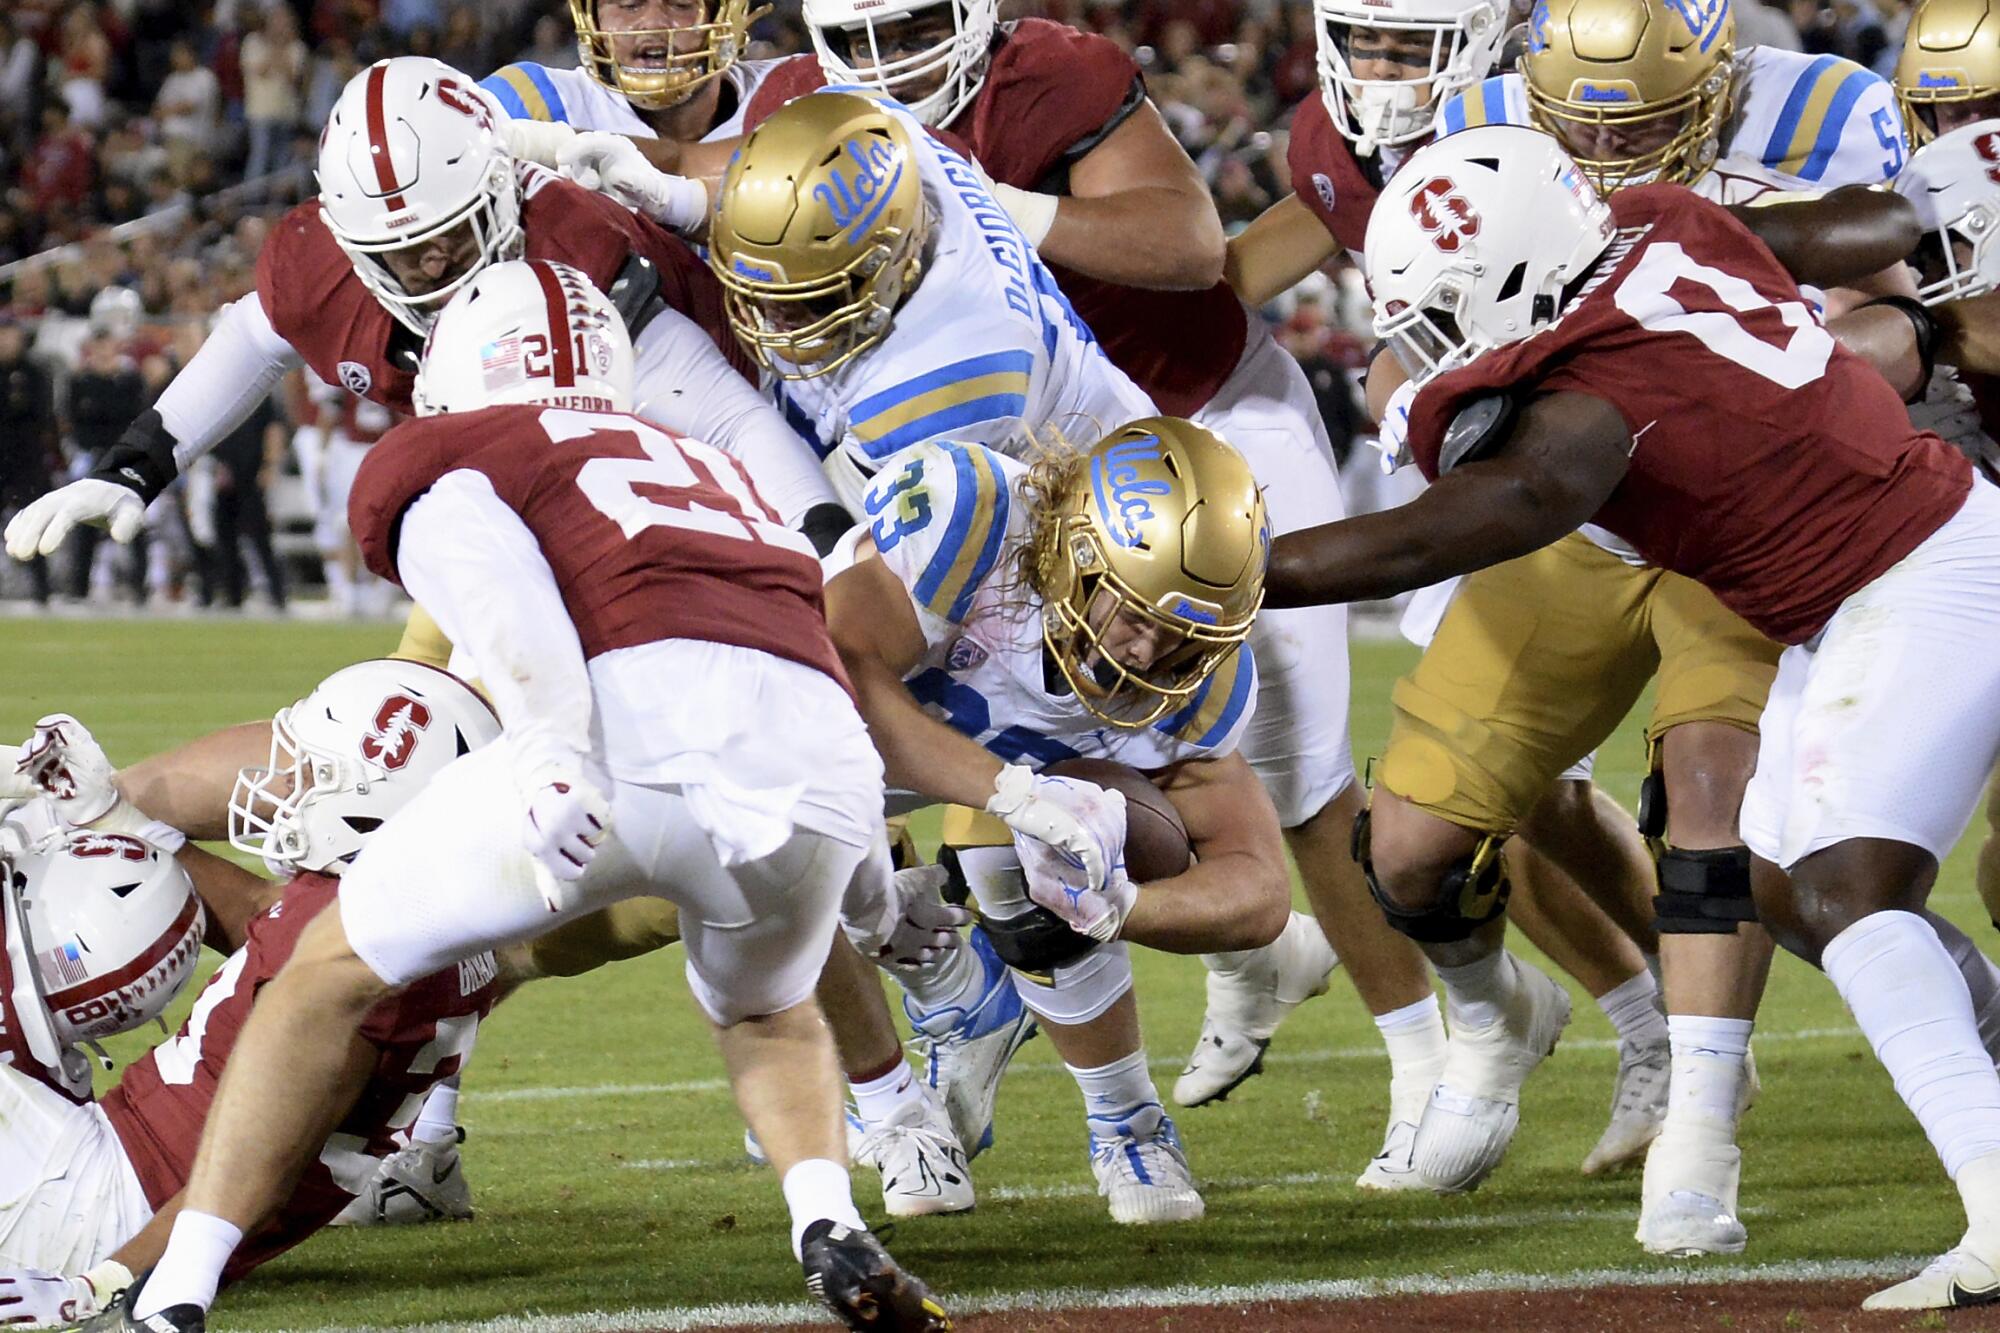 UCLA running back Carson Steele (33) scores a touchdown during an NCAA college football game.